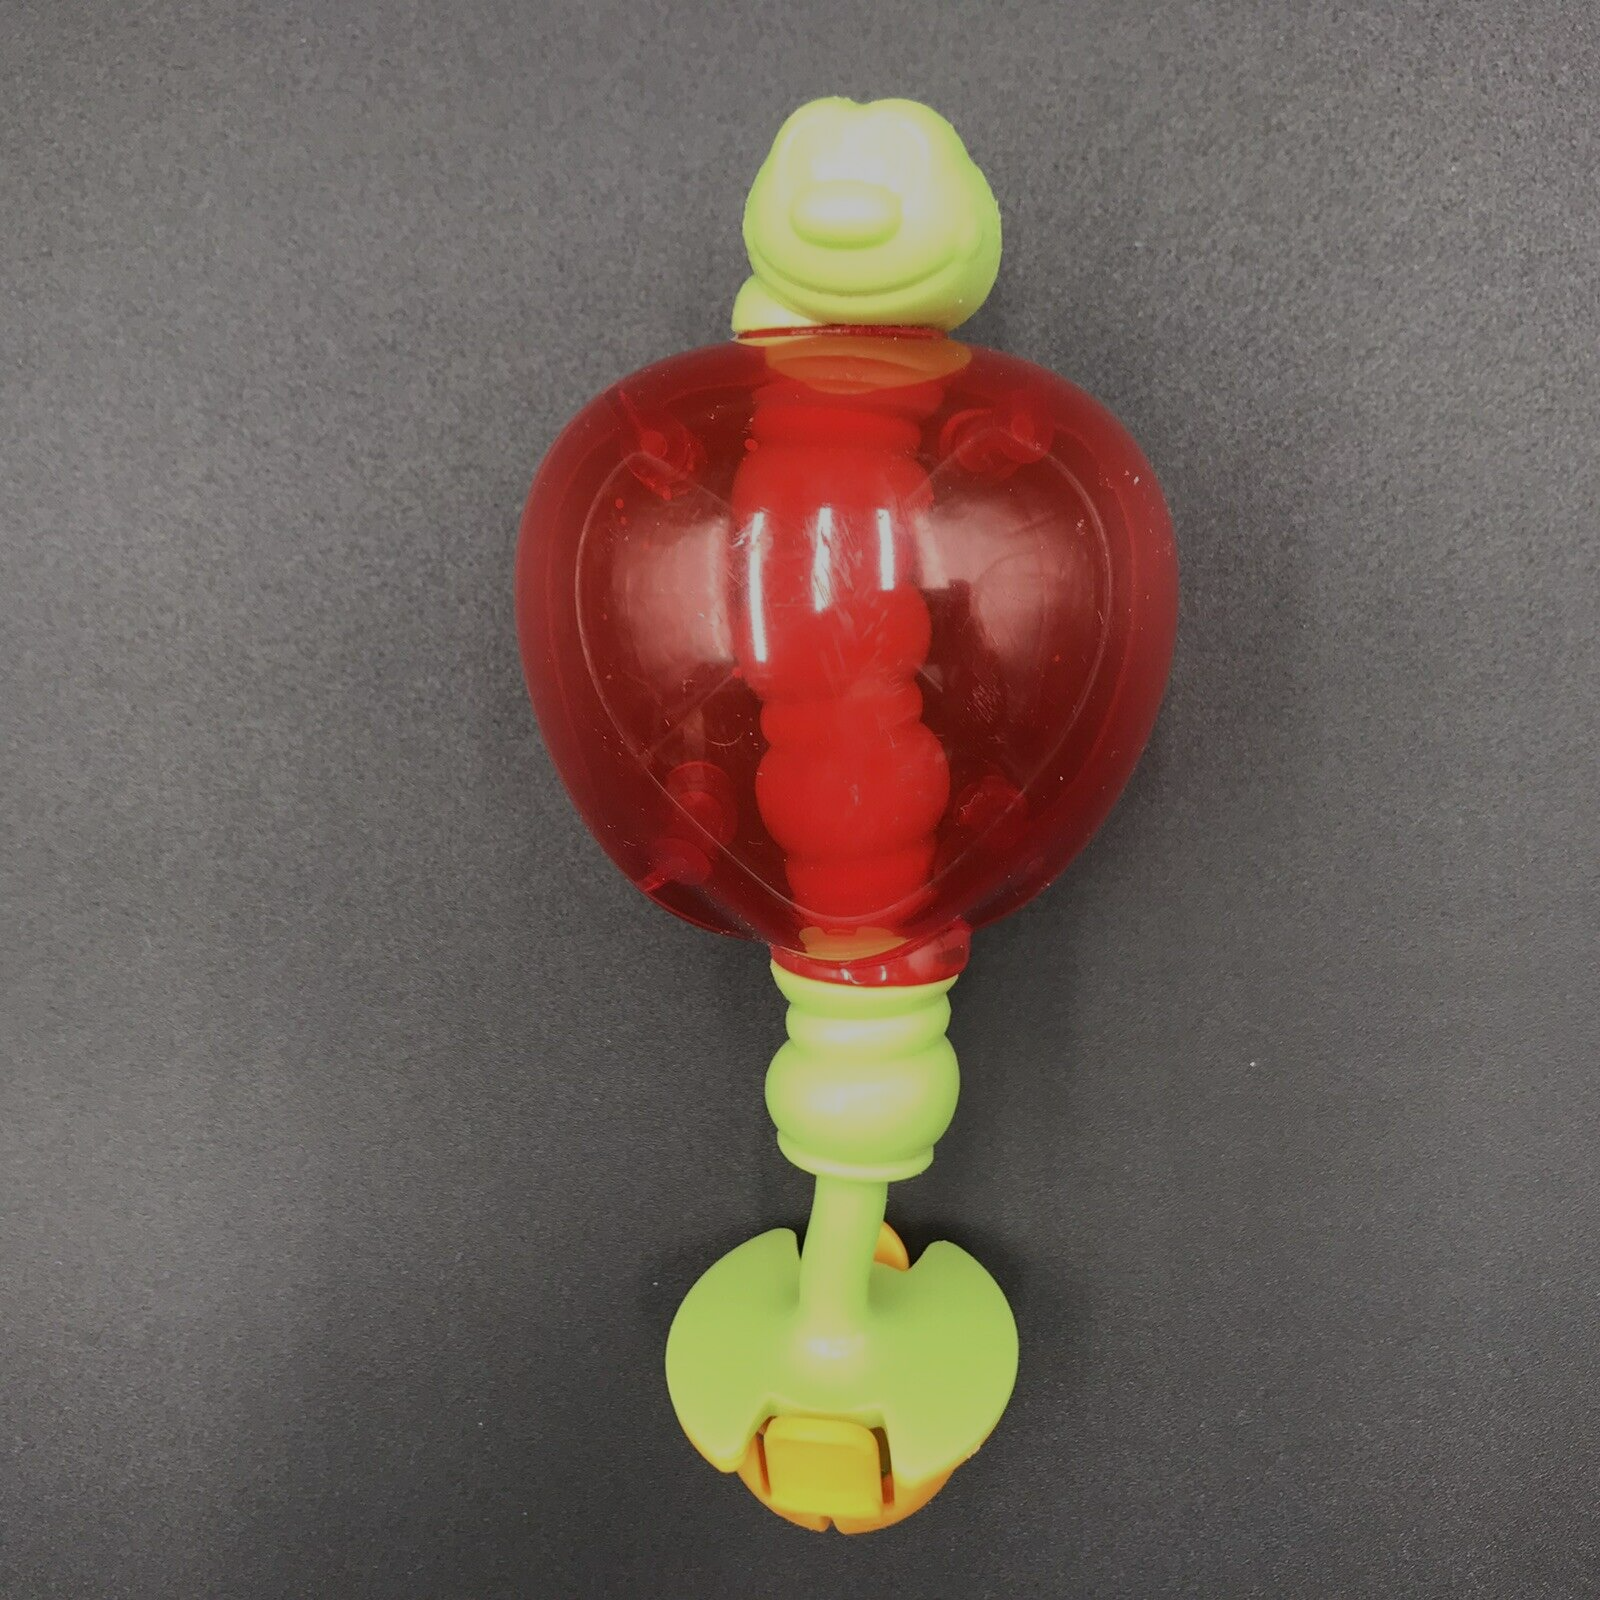 Evenflo ExerSaucer Replacement Apple Toy Rattle Frog - $5.99